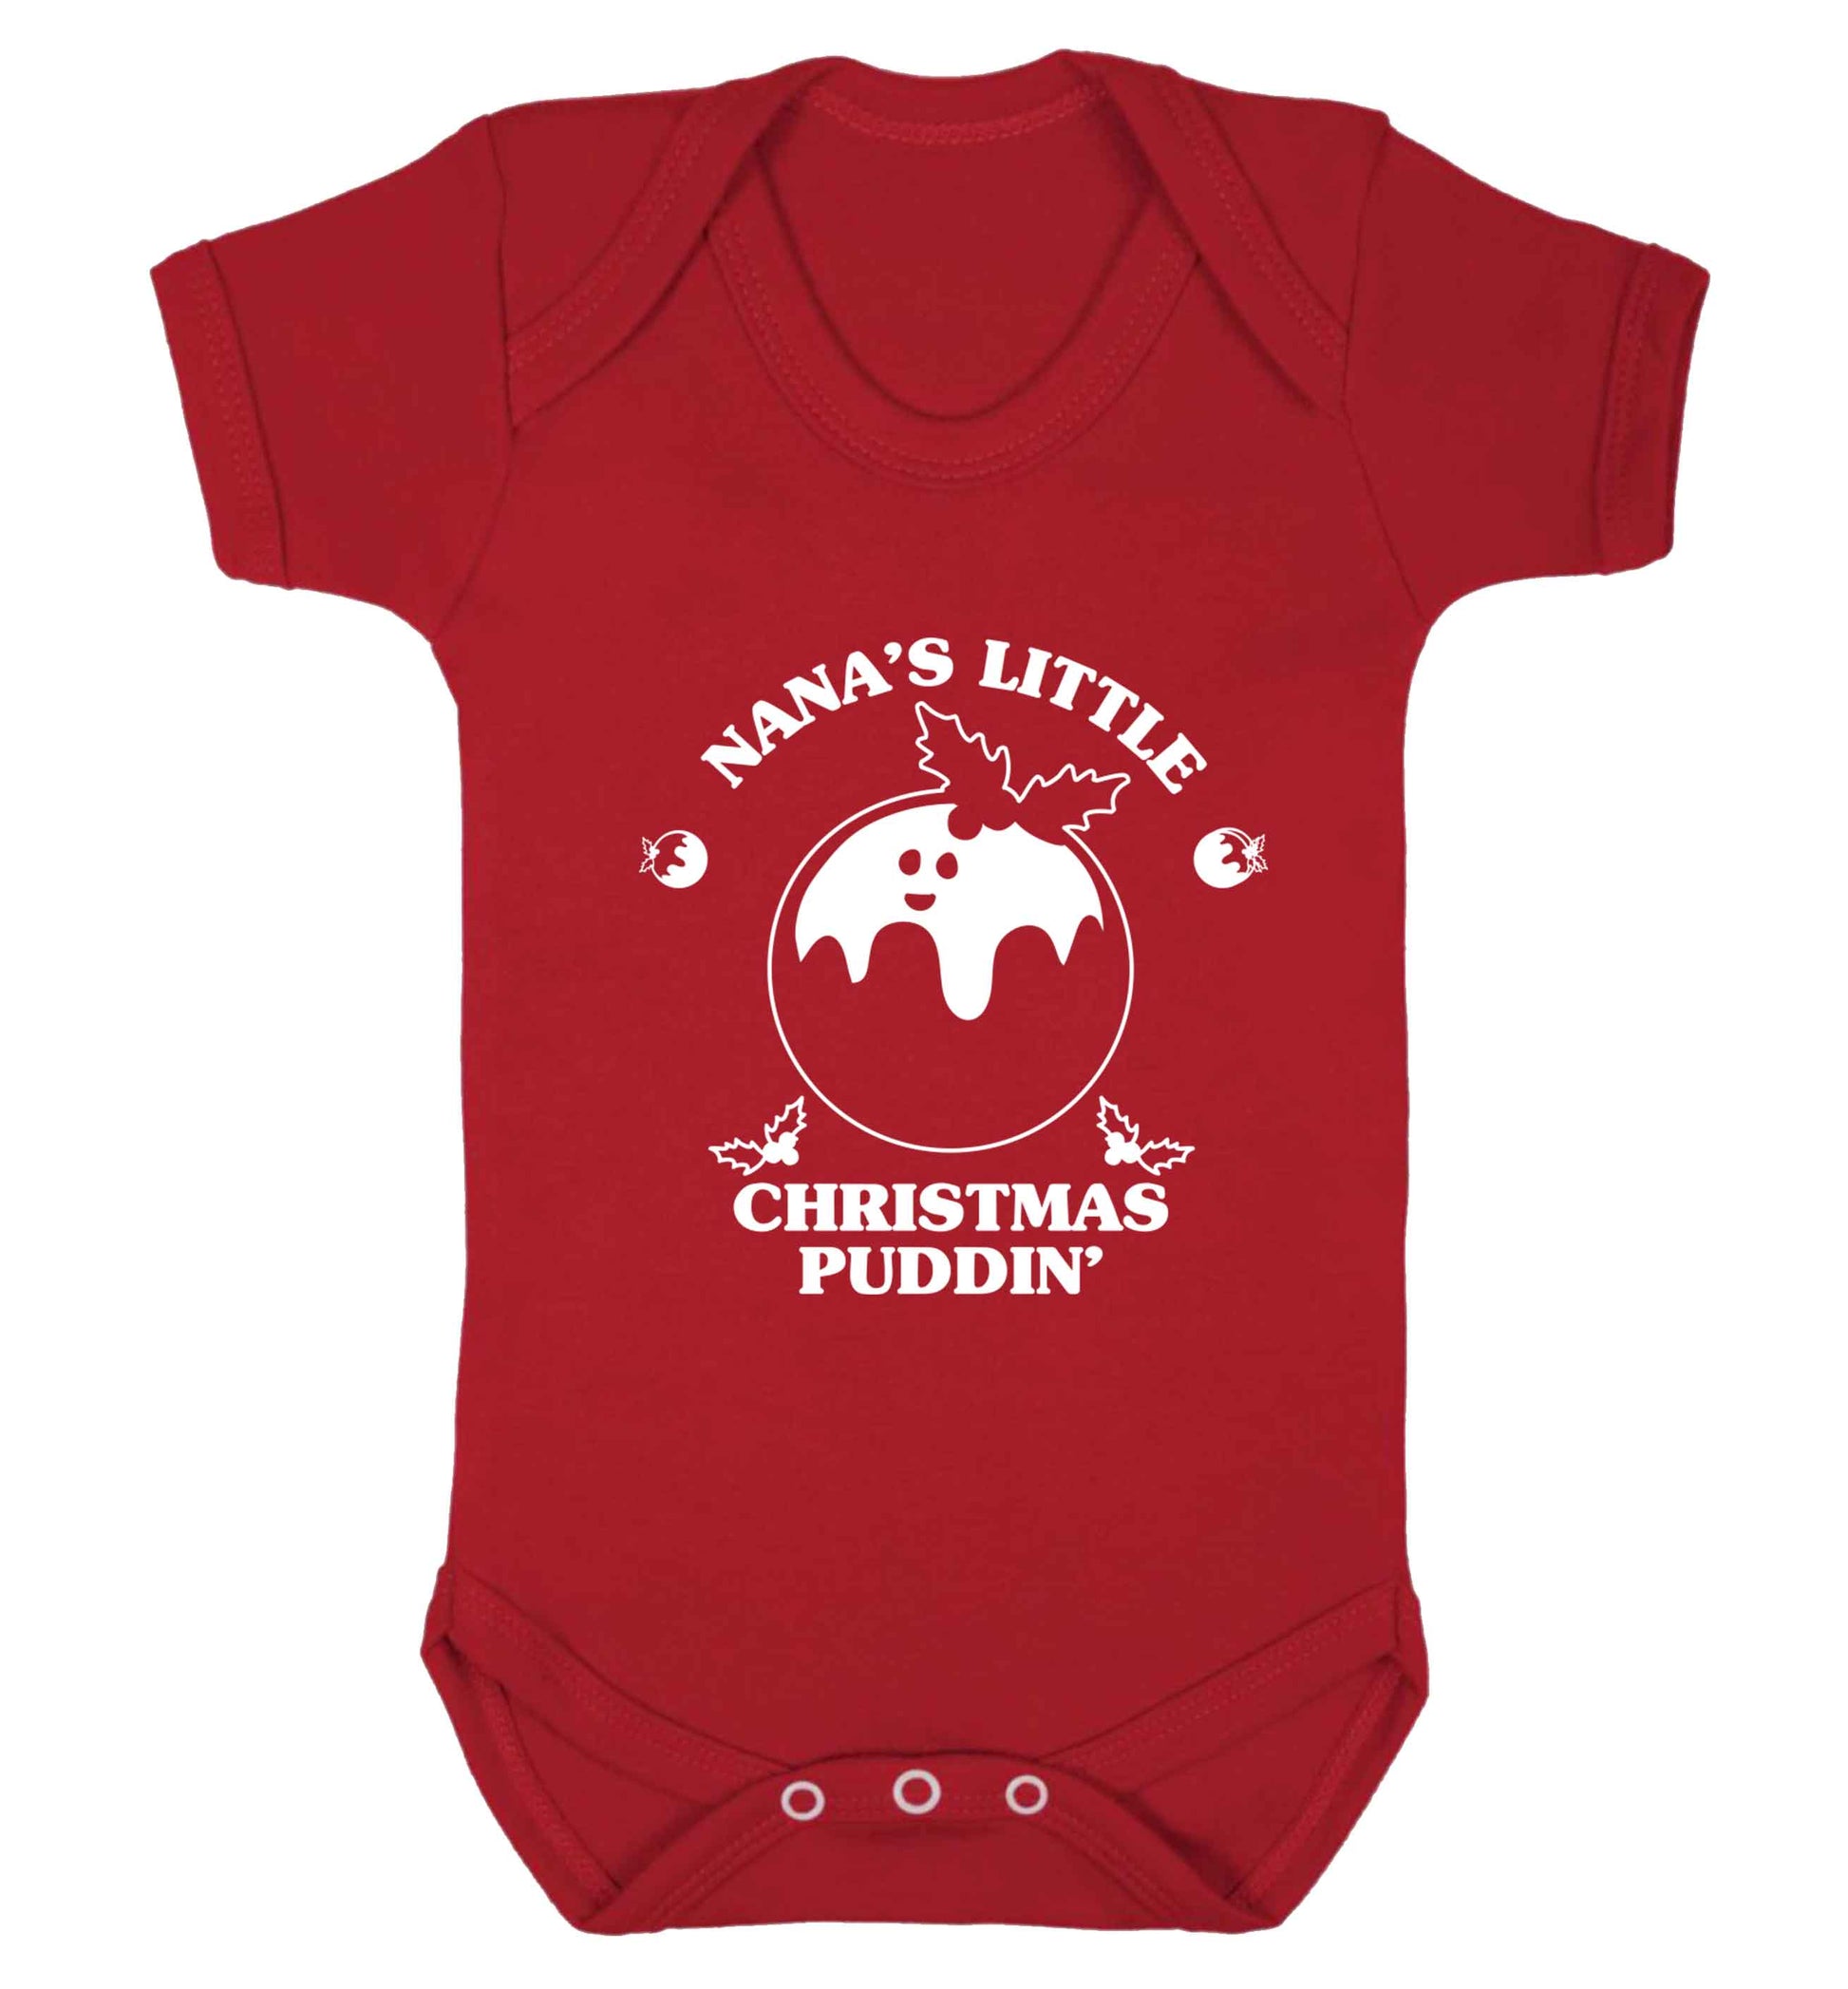 Nana's little Christmas puddin' Baby Vest red 18-24 months